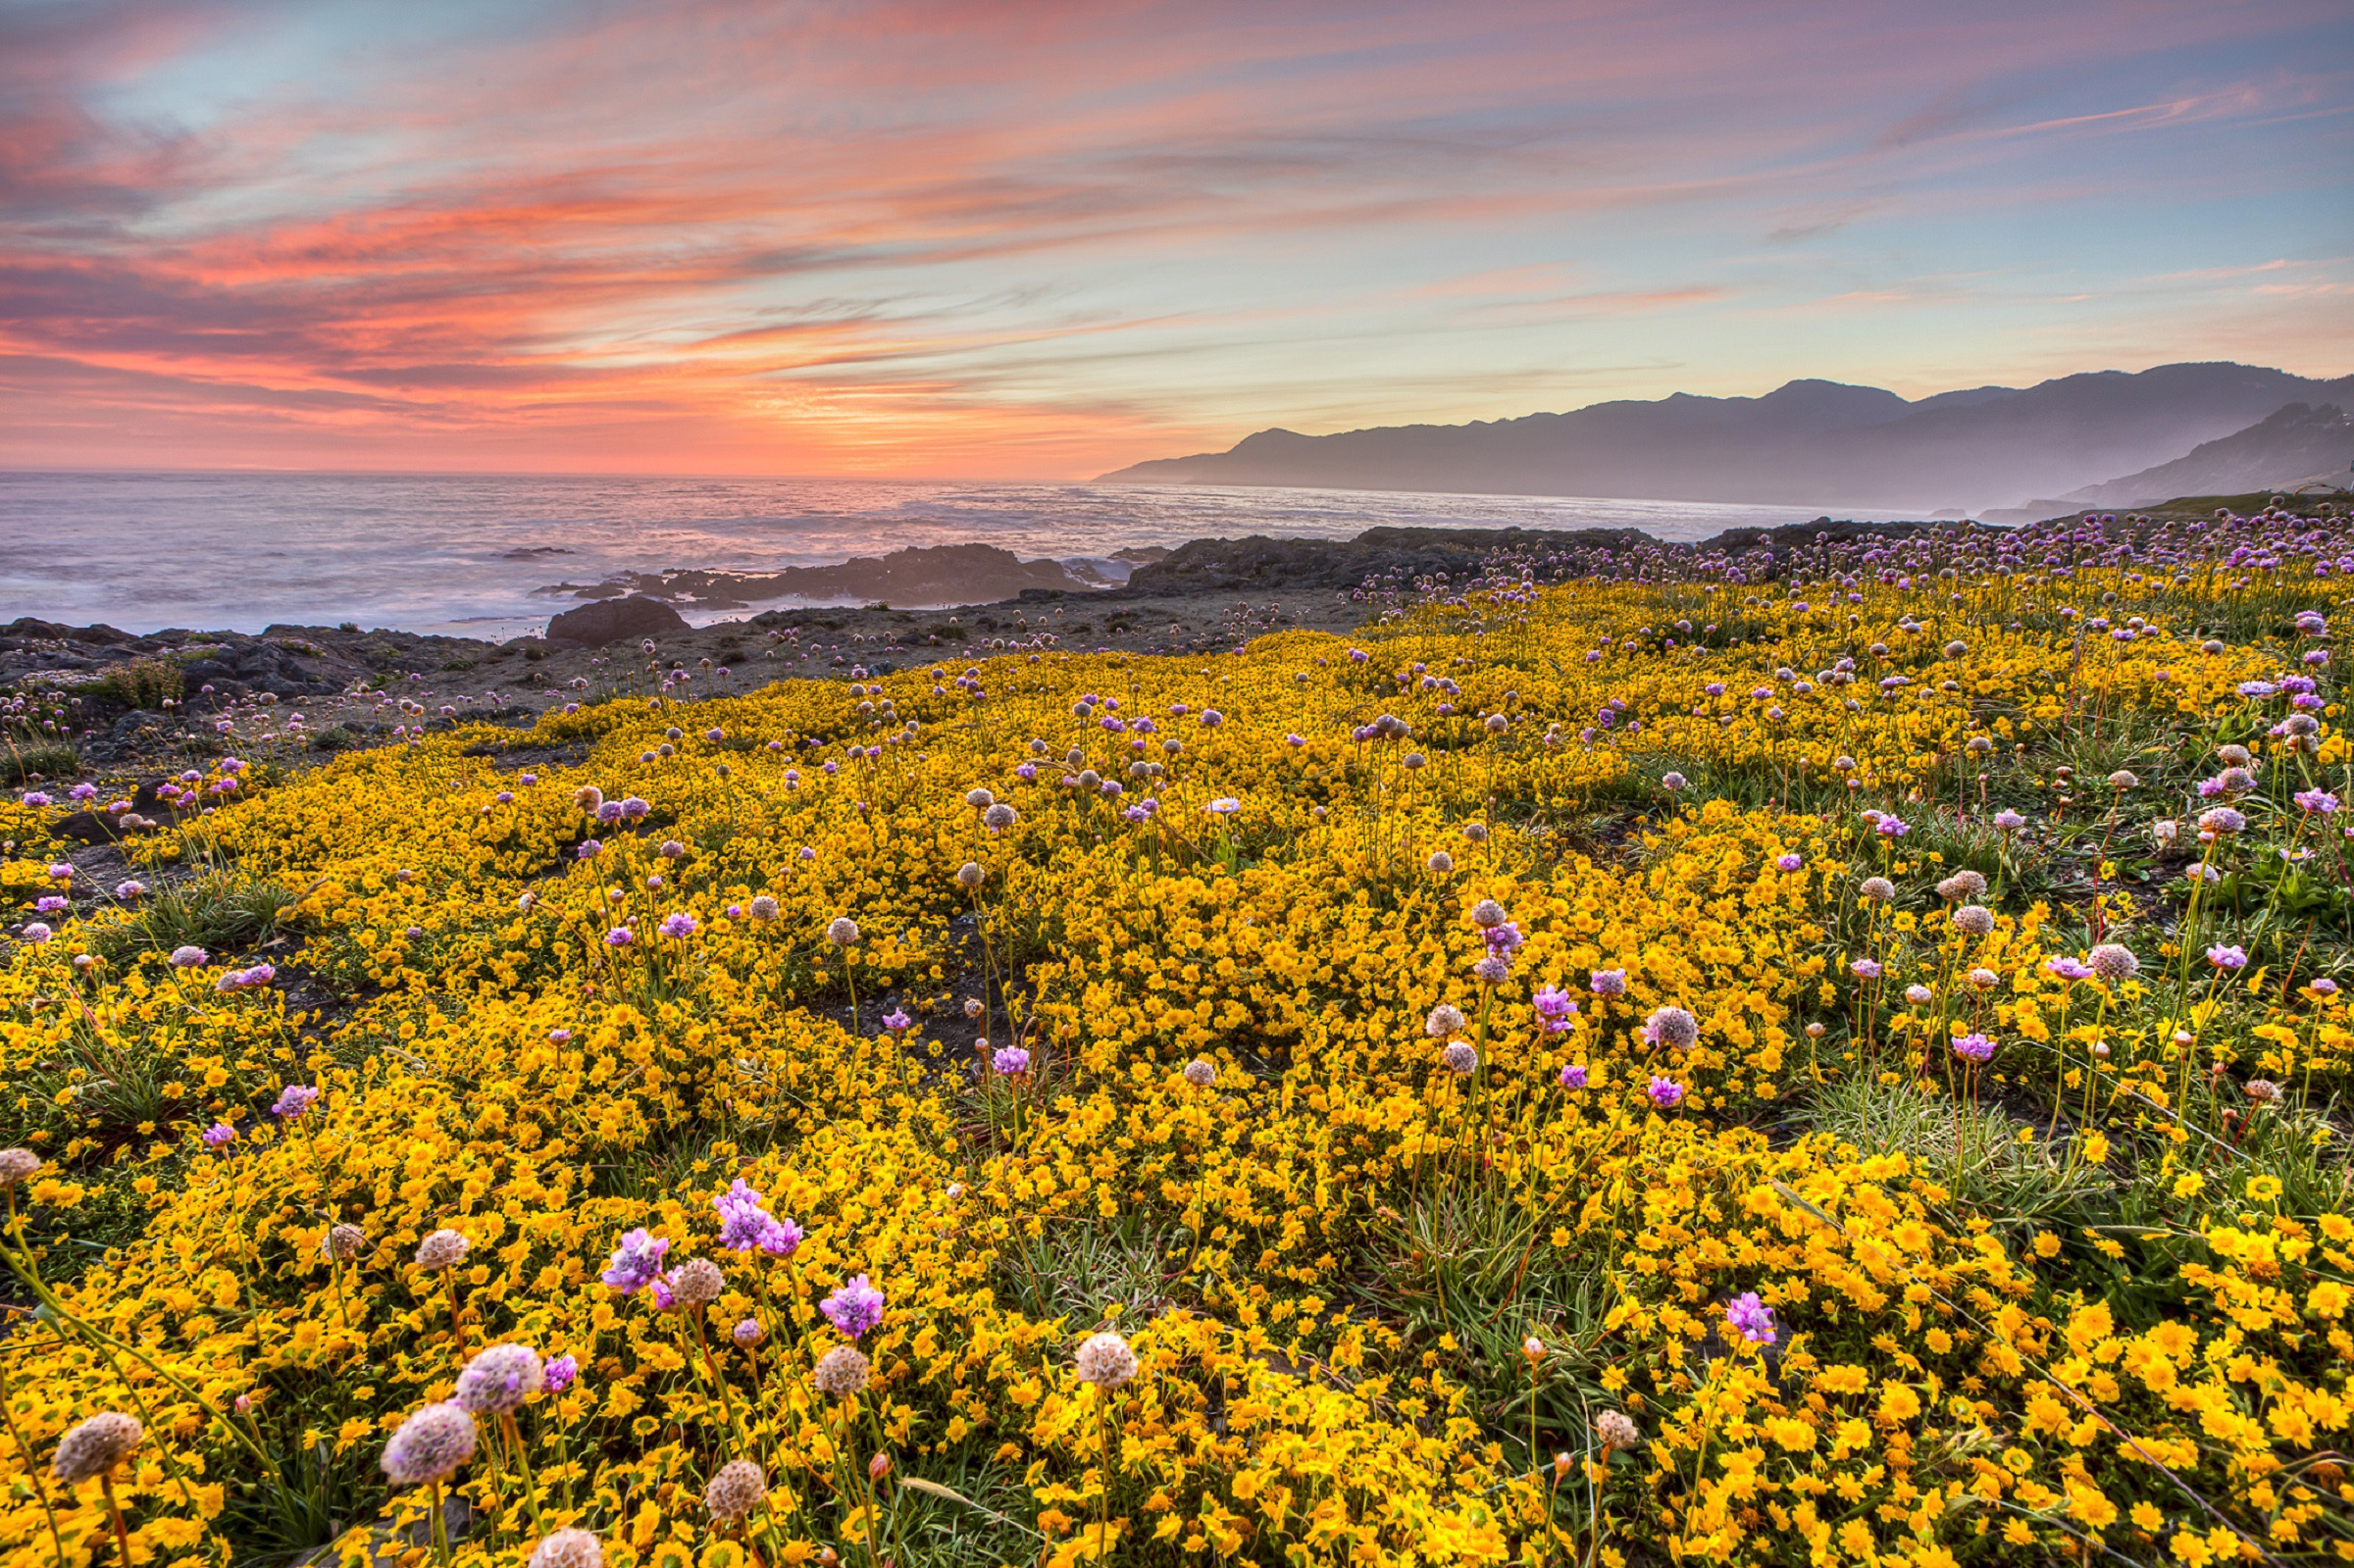 Shoreline Landscape With Yellow Flowers With Dusk Sky In